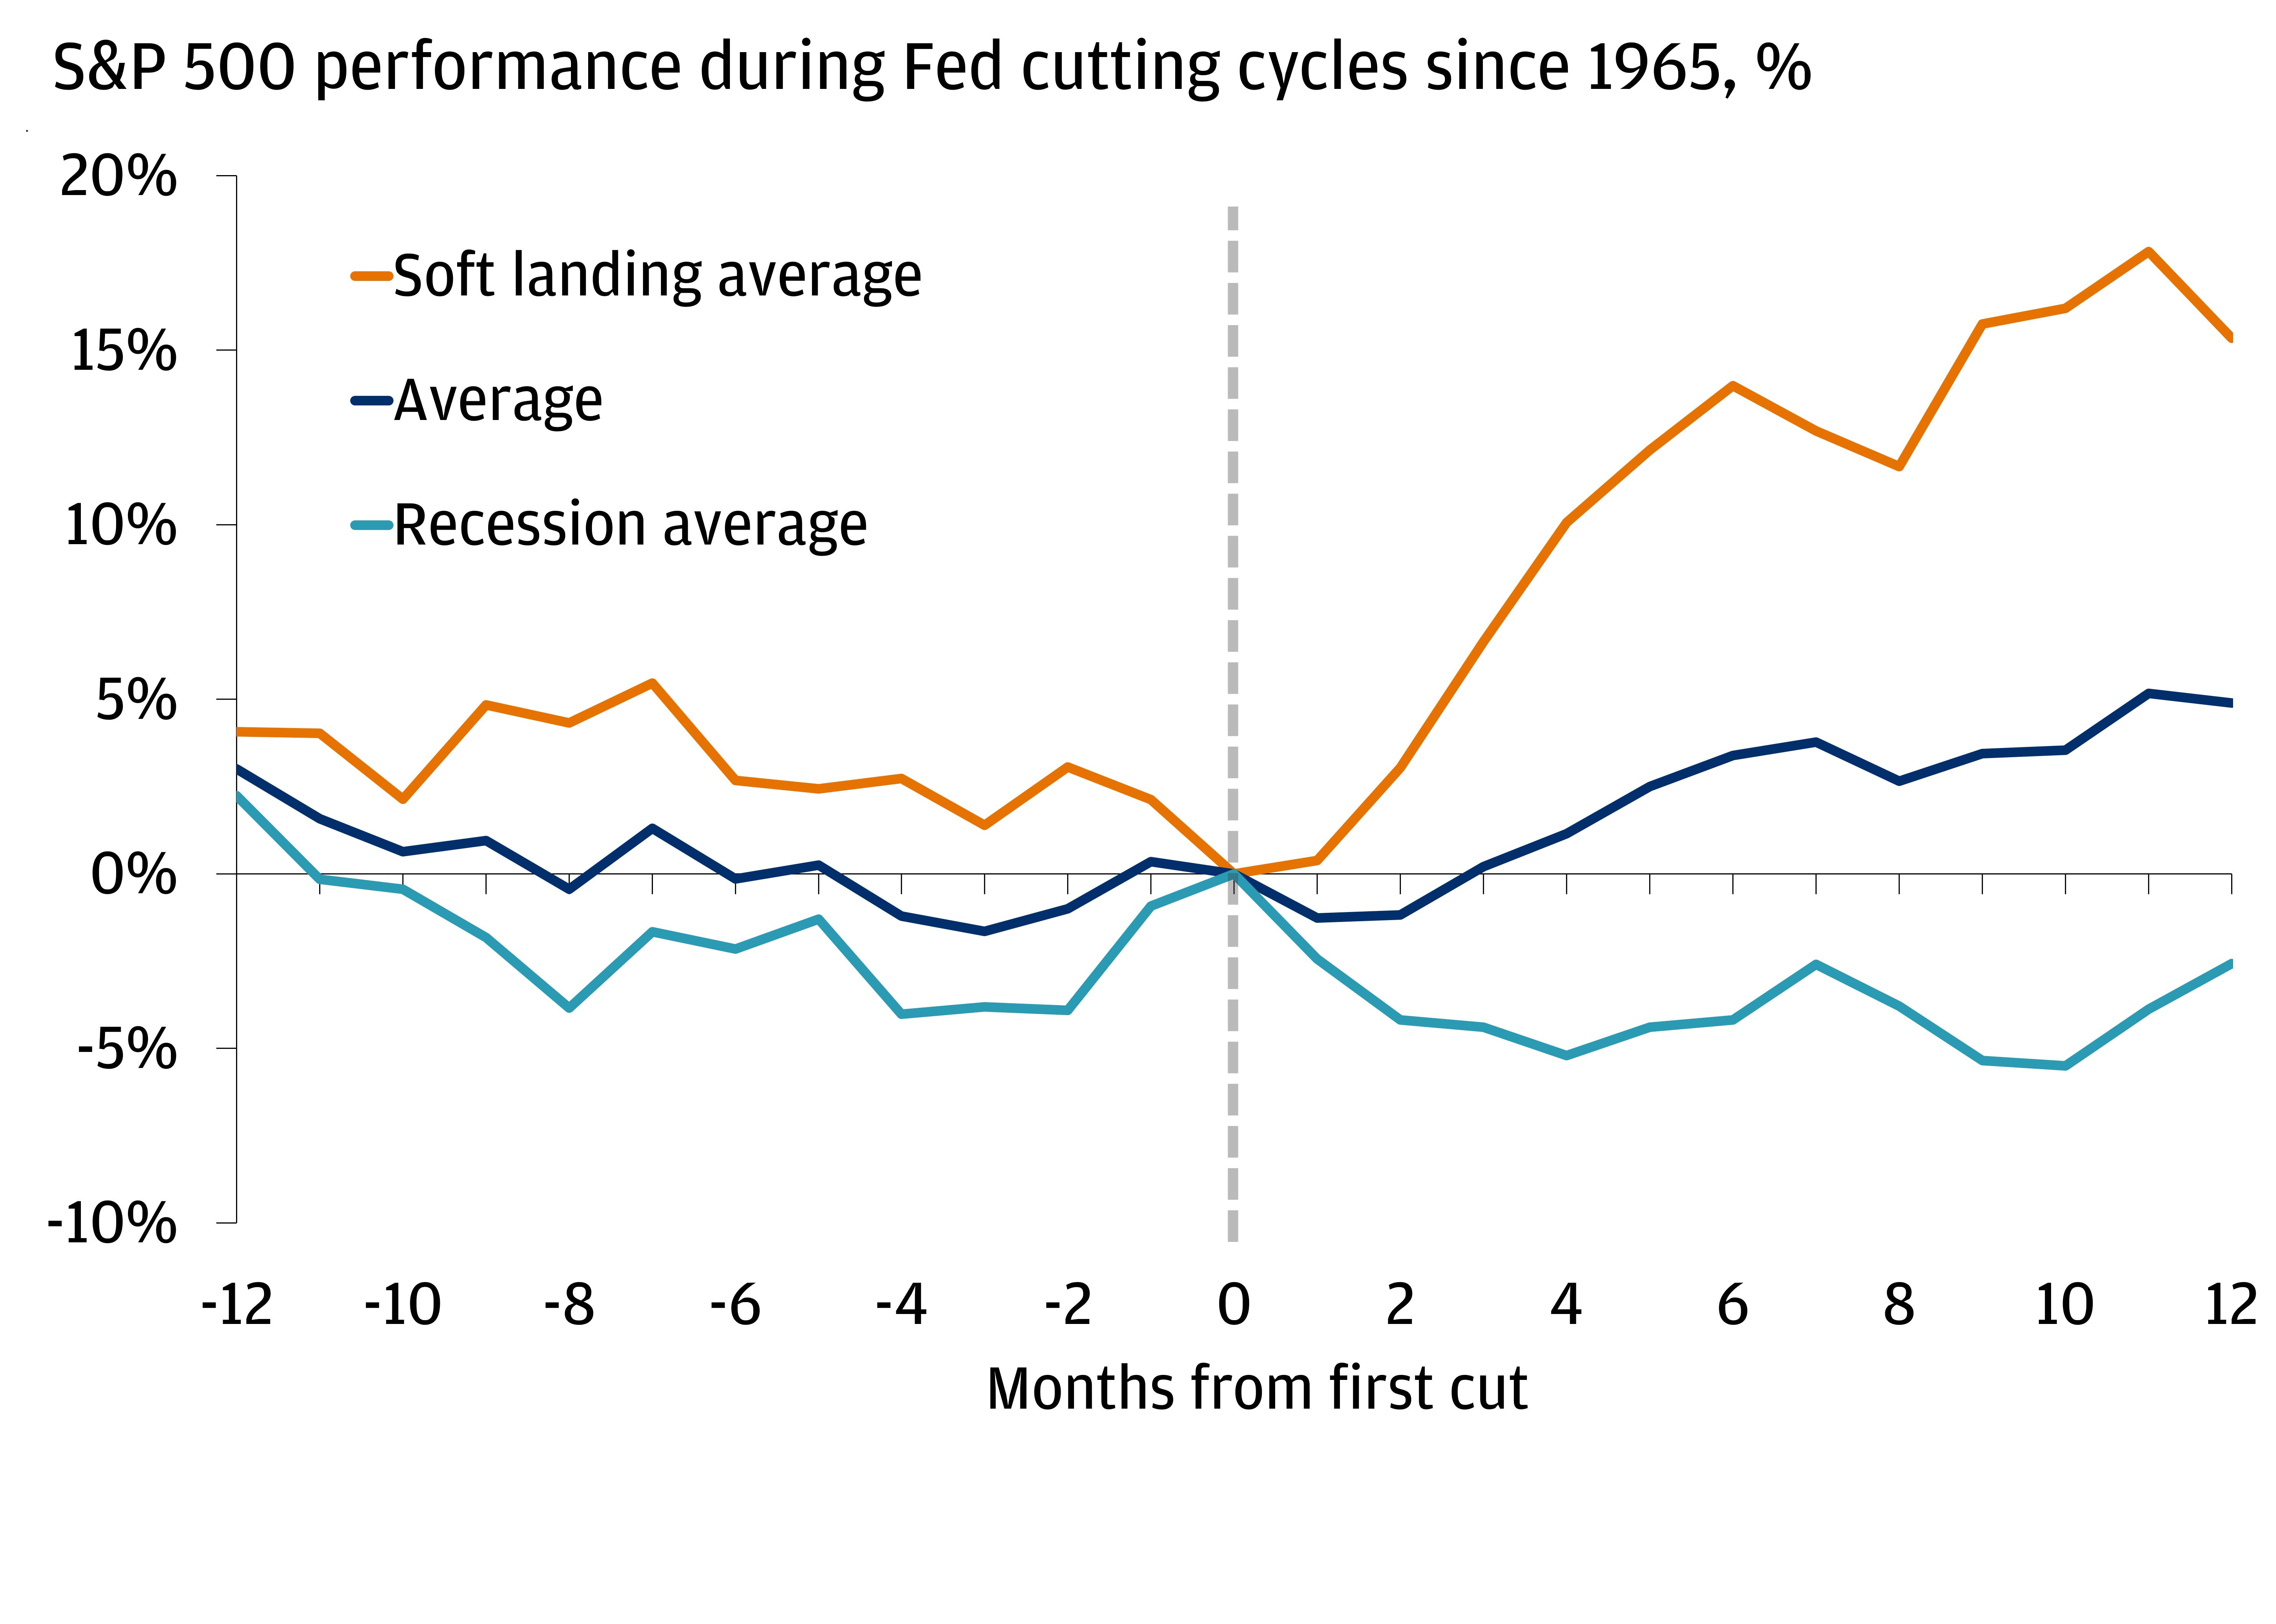 This chart shows S&P 500 performance during Fed cutting cycles since 1965.